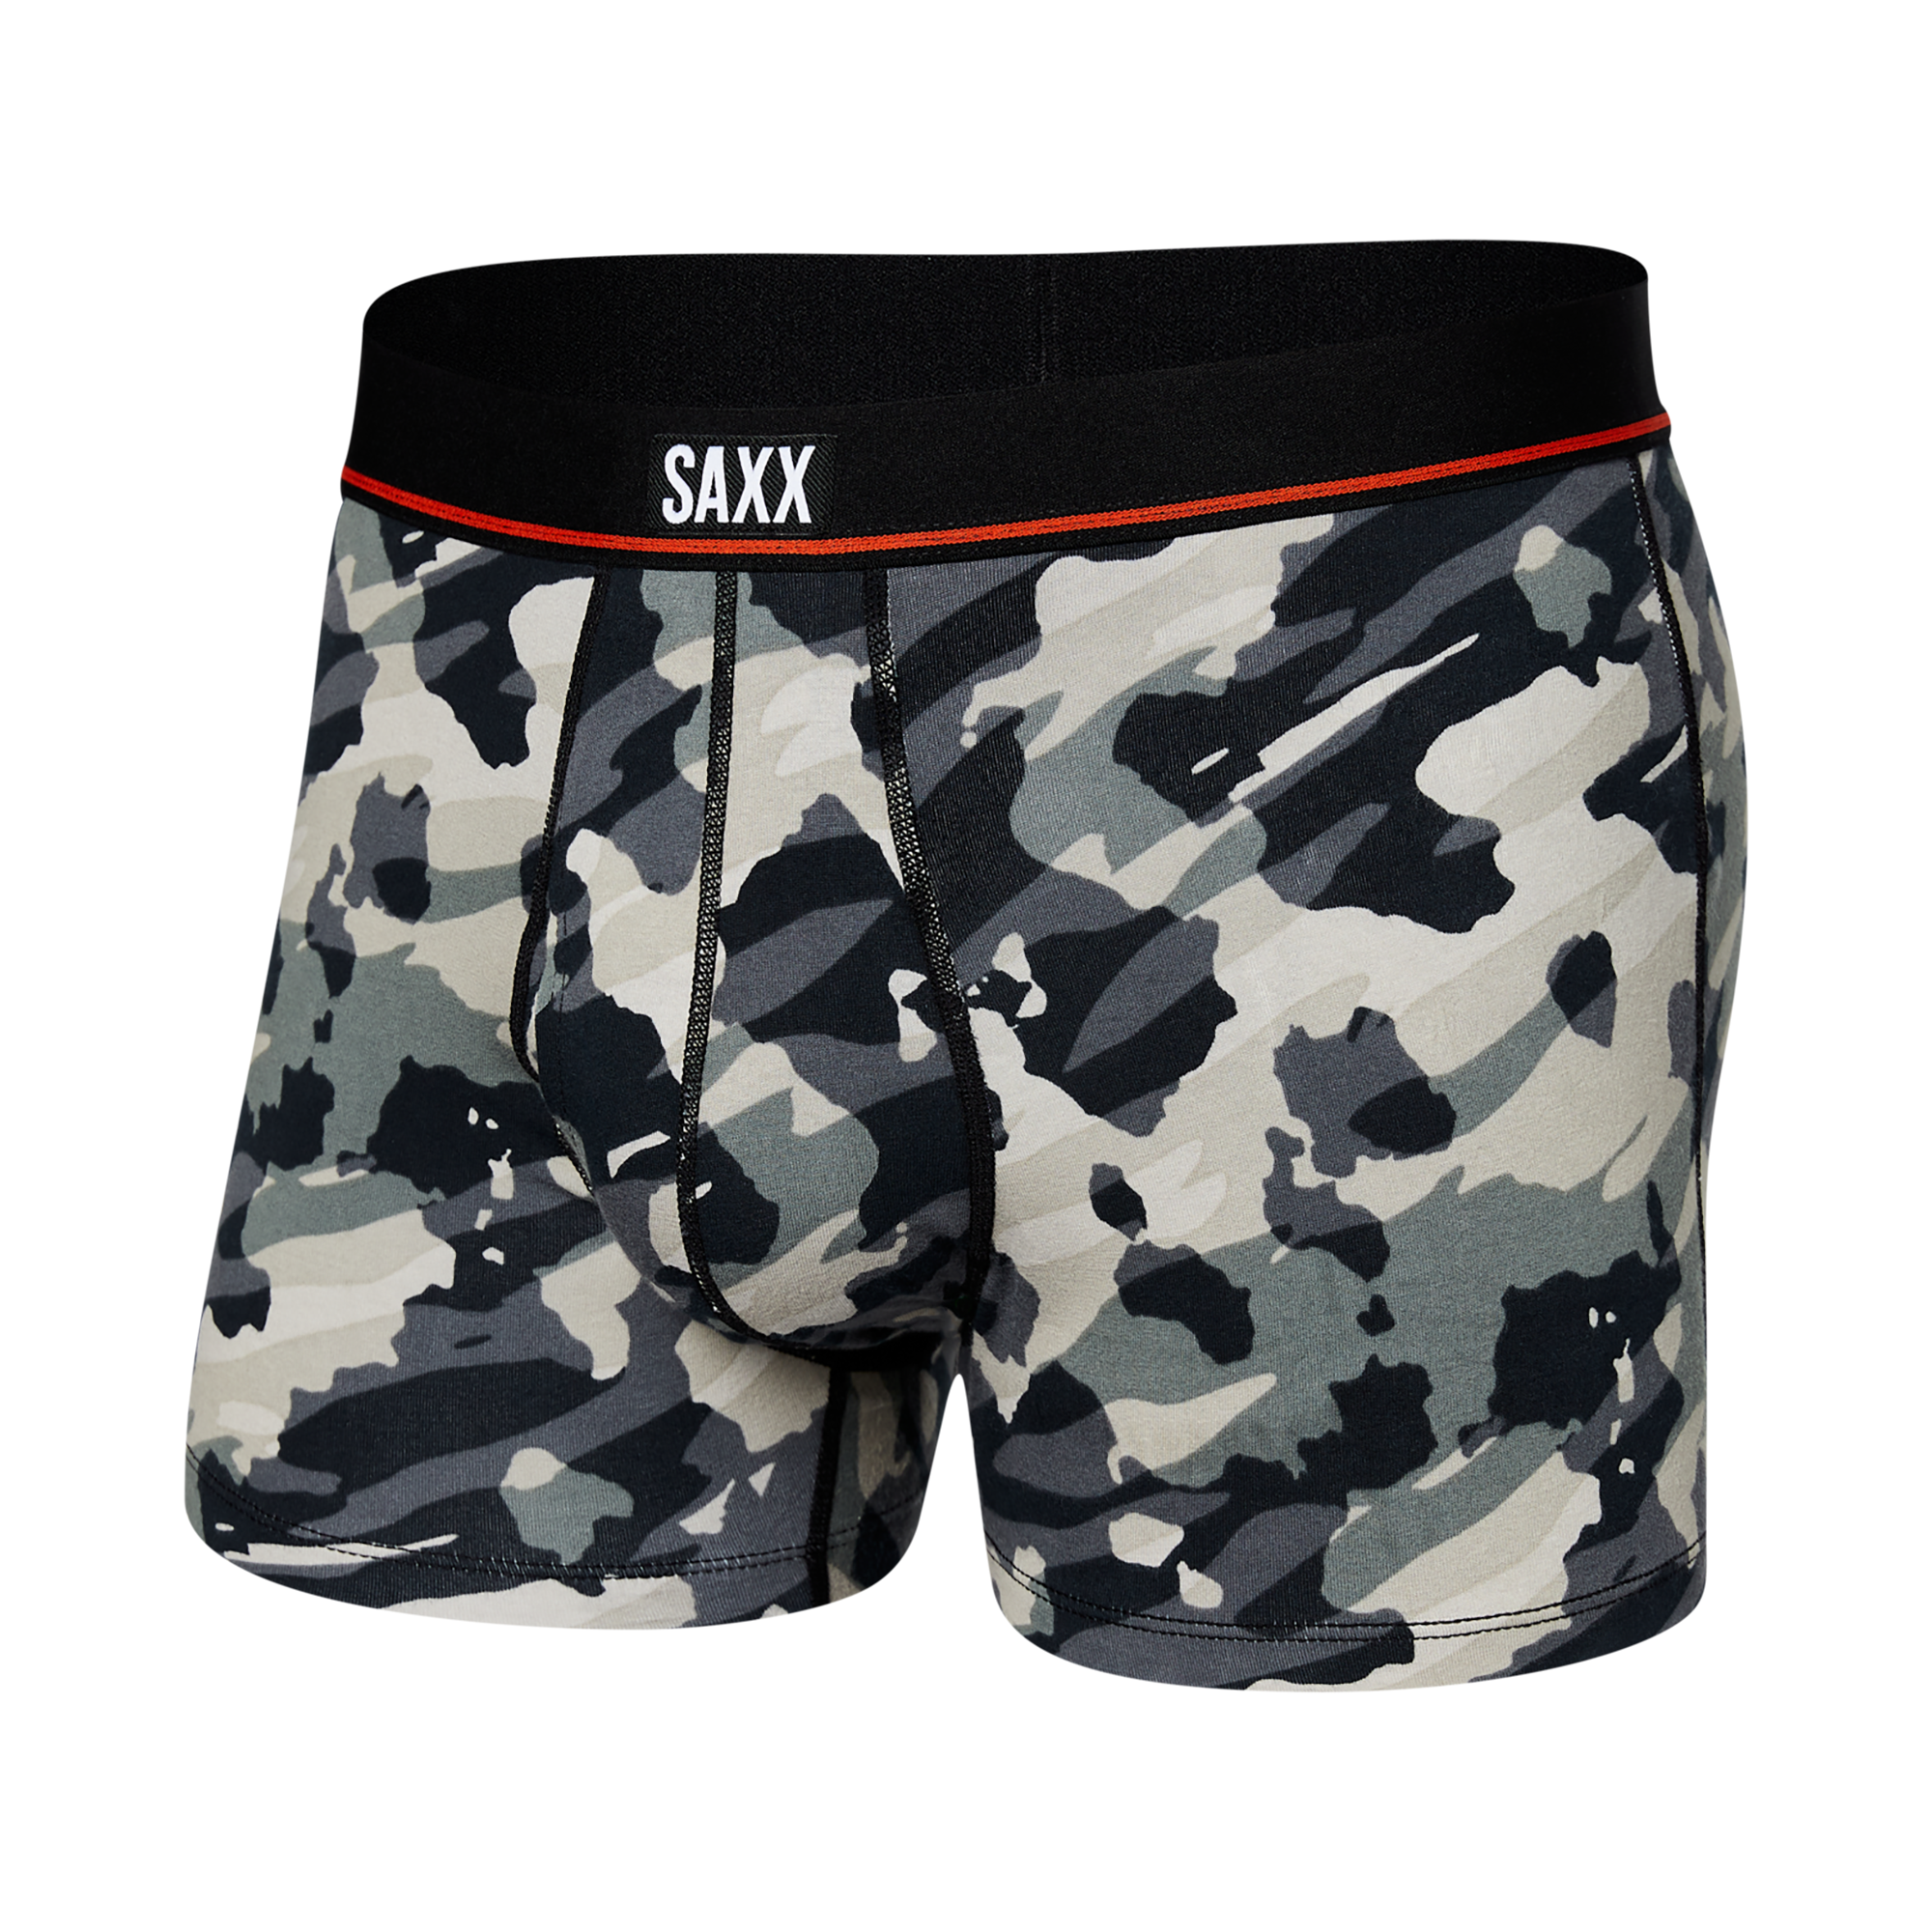 Front of Non-Stop Stretch Cotton Trunk in Pop Grunge Camo- Graphite